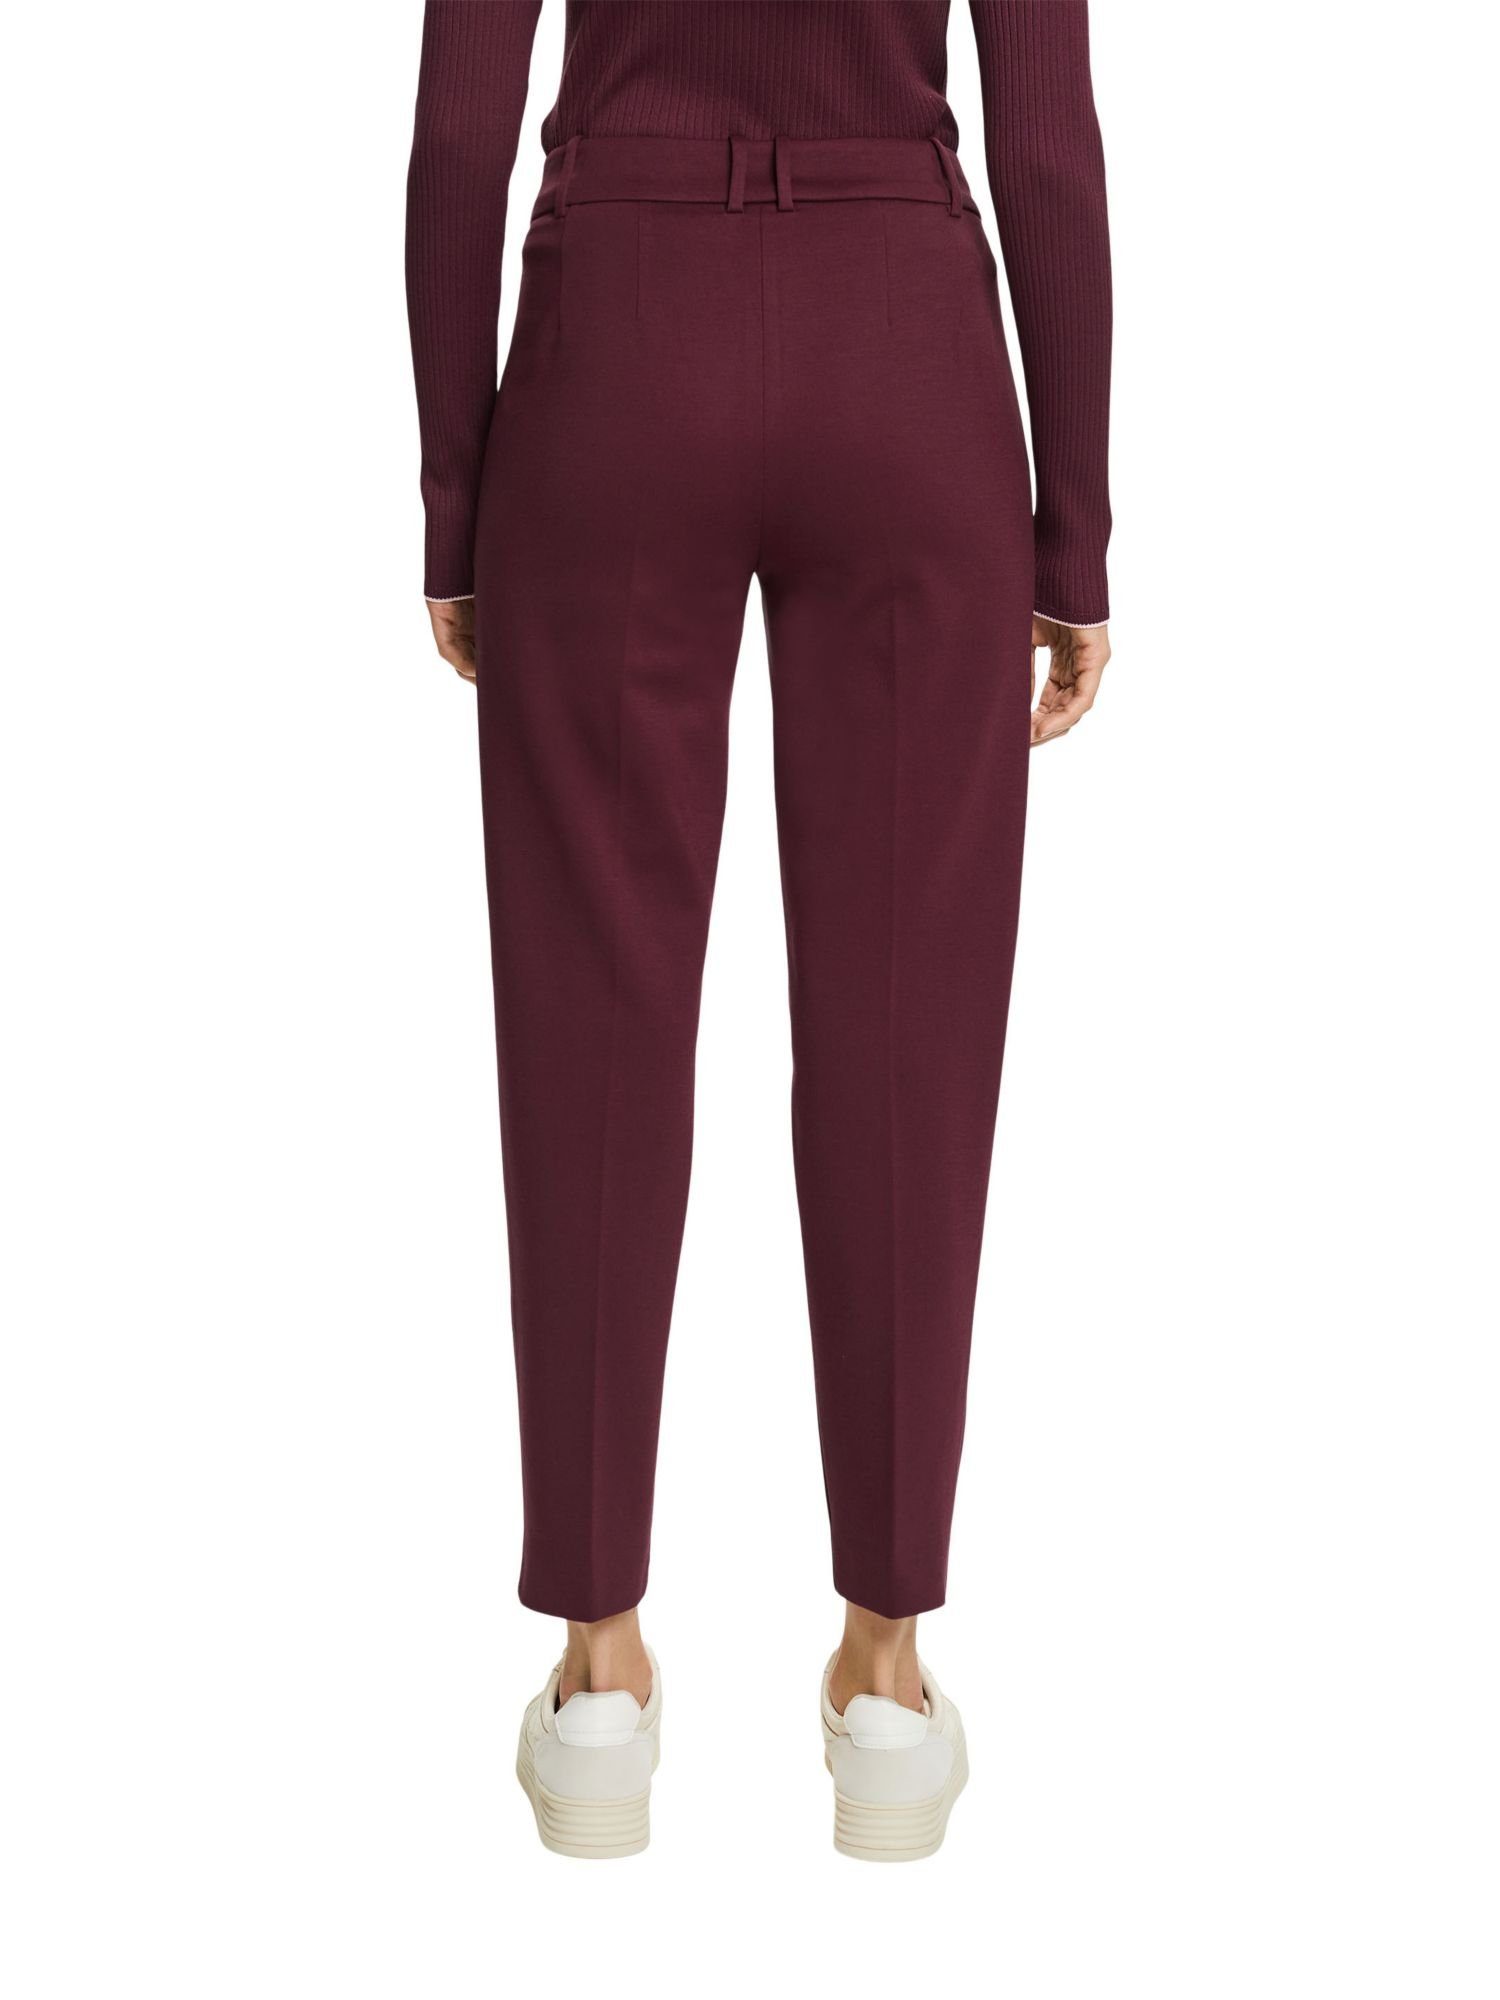 PUNTO Stretch-Hose AUBERGINE Tapered Collection Match Esprit Mix SPORTY & Pants